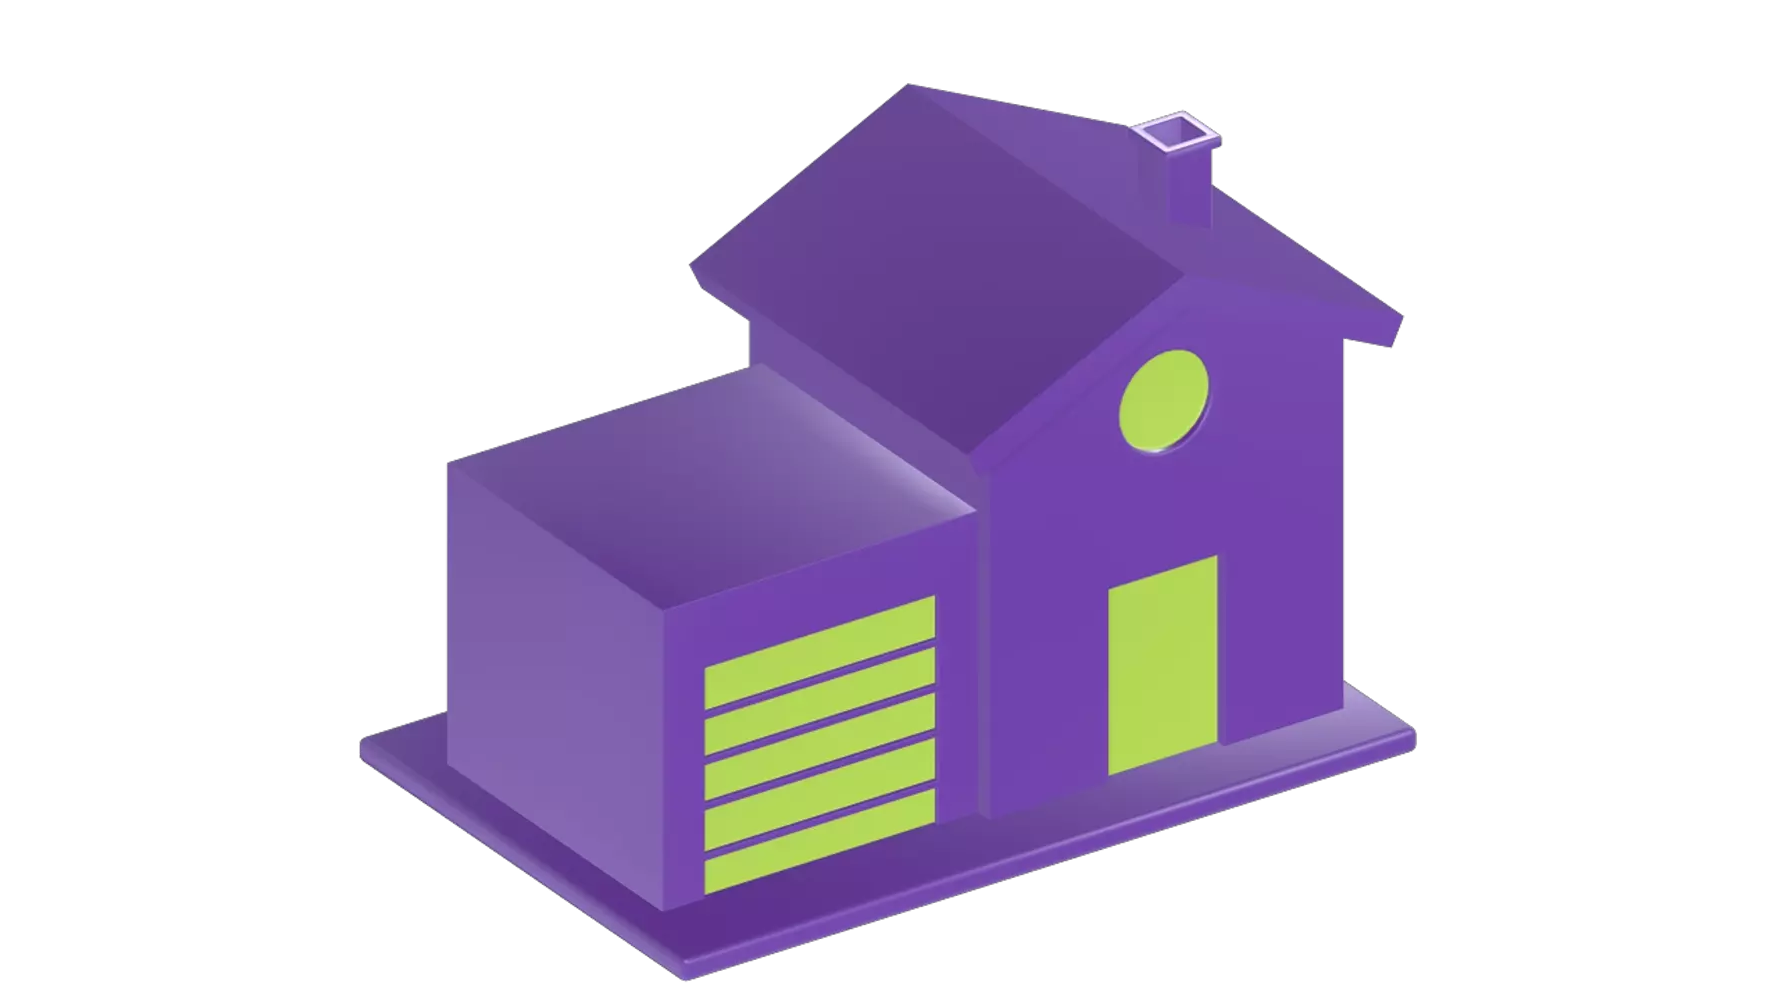 House With Garage 3D Graphic